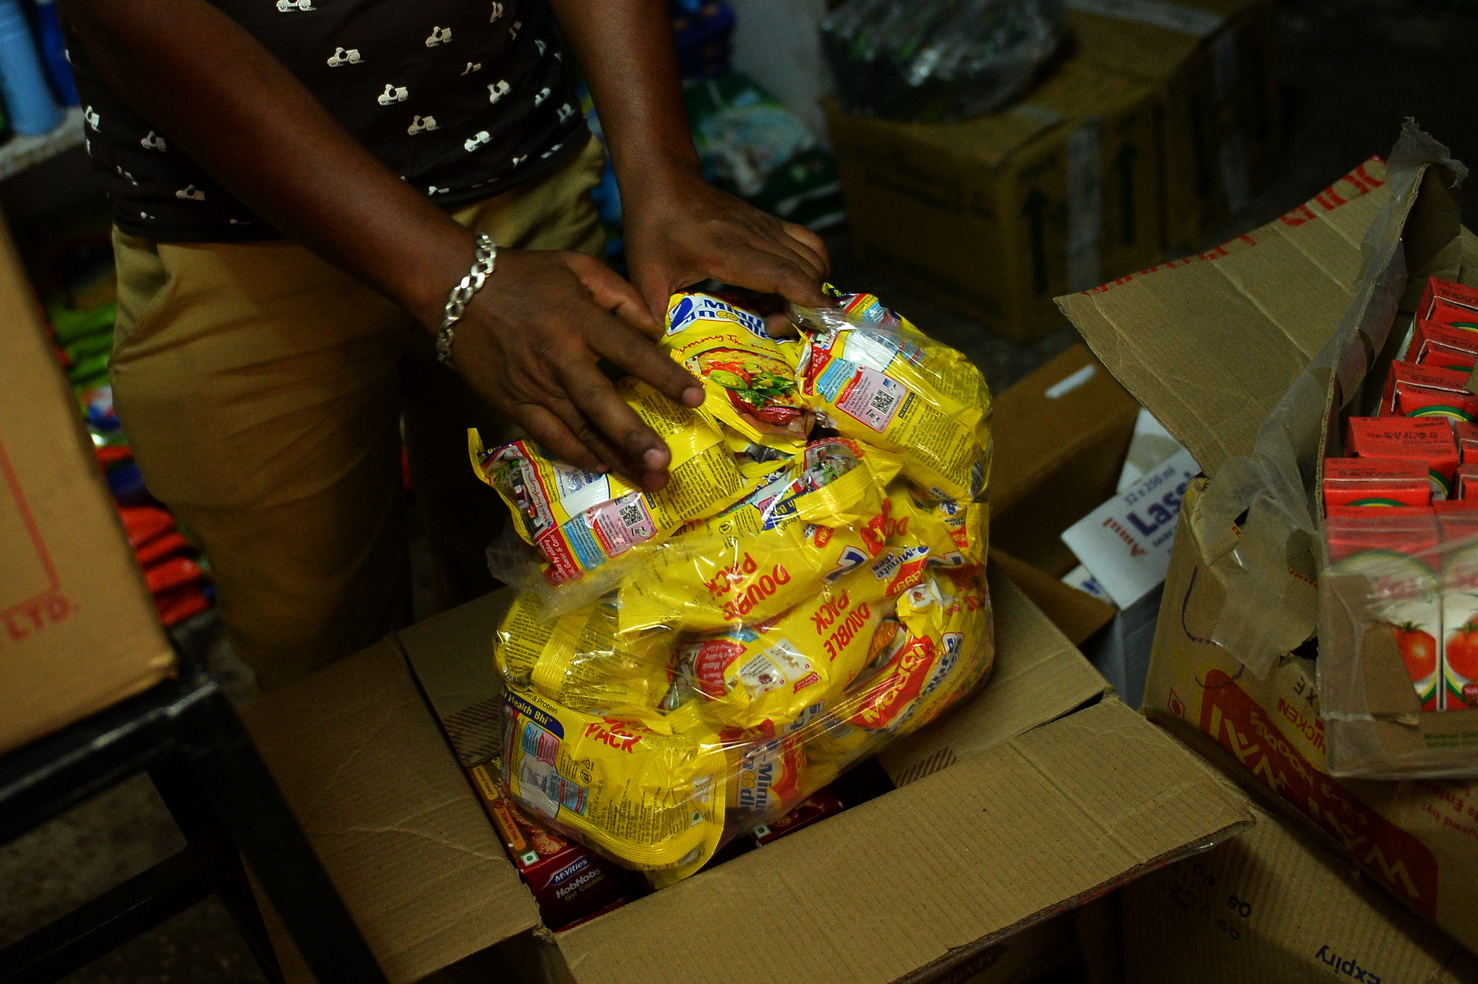 In this photograph taken on June 17, 2015, an Indian shopkeeper puts packs of Nestle 'Maggi' instant noodles into a plastic bag in his shop in New Delhi.  Nestle chief Paul Bulcke said that he wanted to see its hugely popular Maggi brand of instant noodles back on the Indian market as soon as possible after it was banned over a health scare. India's food safety regulator on June 5 banned the product after tests that it said showed the noodles contained excessive levels of lead.  AFP PHOTO/Chandan KHANNA